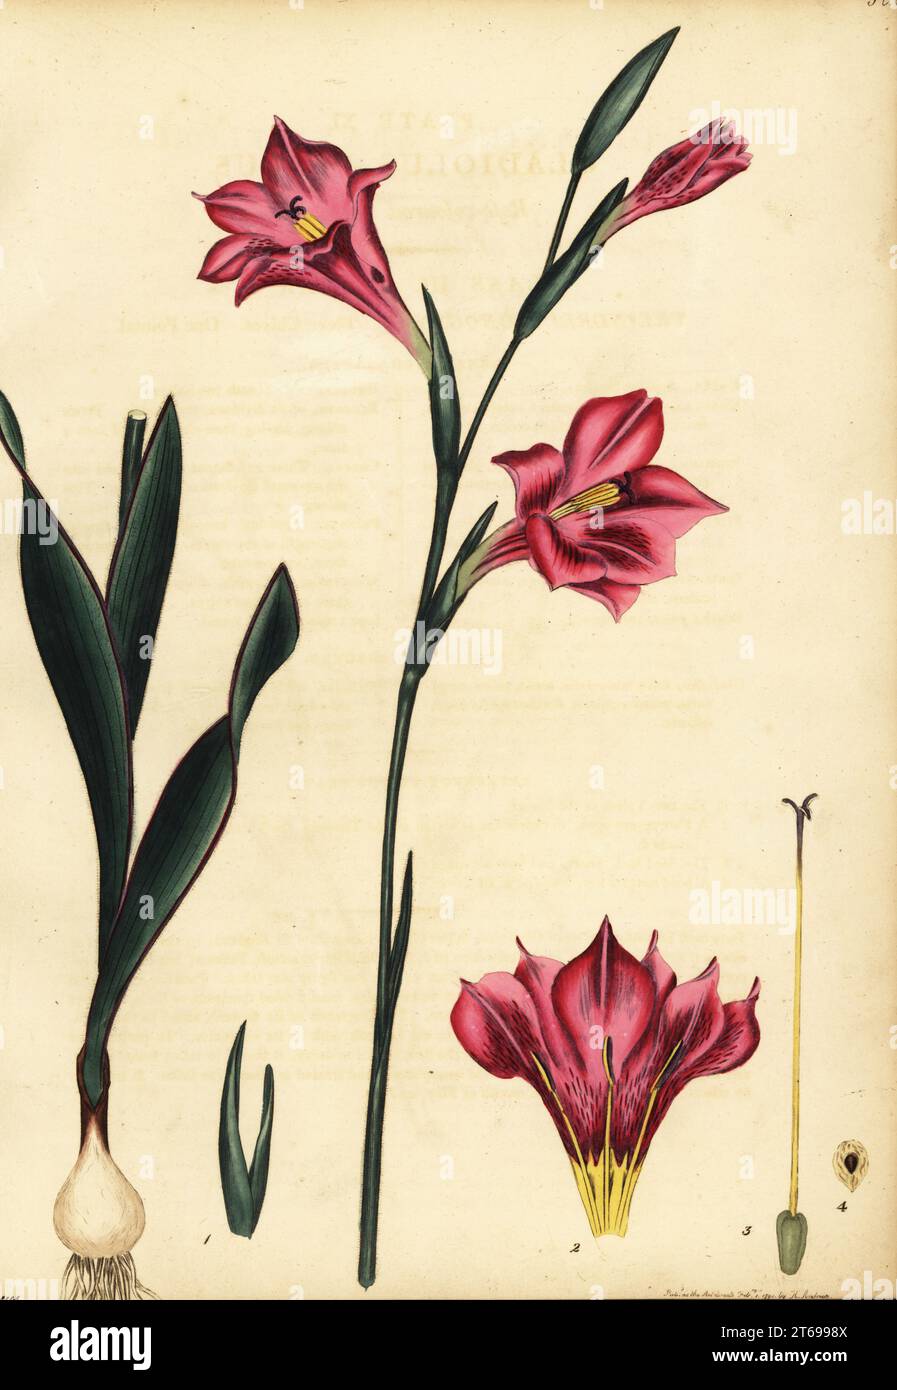 Gladiolus caryophyllaceus. Rose-coloured gladiolus, Gladiolus roseus. Copperplate engraving drawn, engraved and hand-coloured by Henry Andrews from his Botanical Register, Volume 1, published in London, 1799. Stock Photo